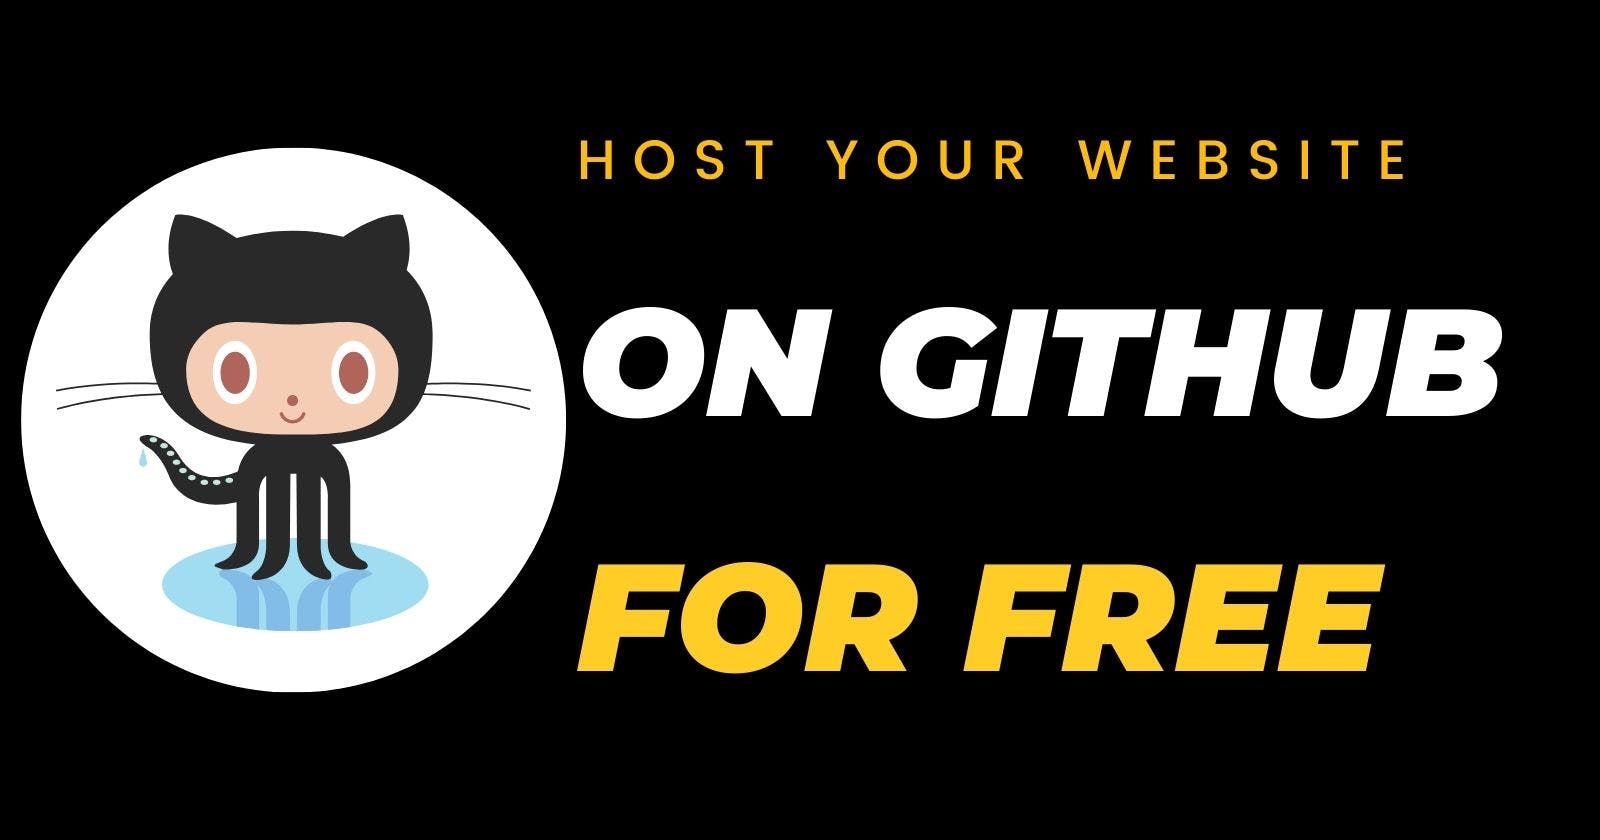 How to host your website on GitHub